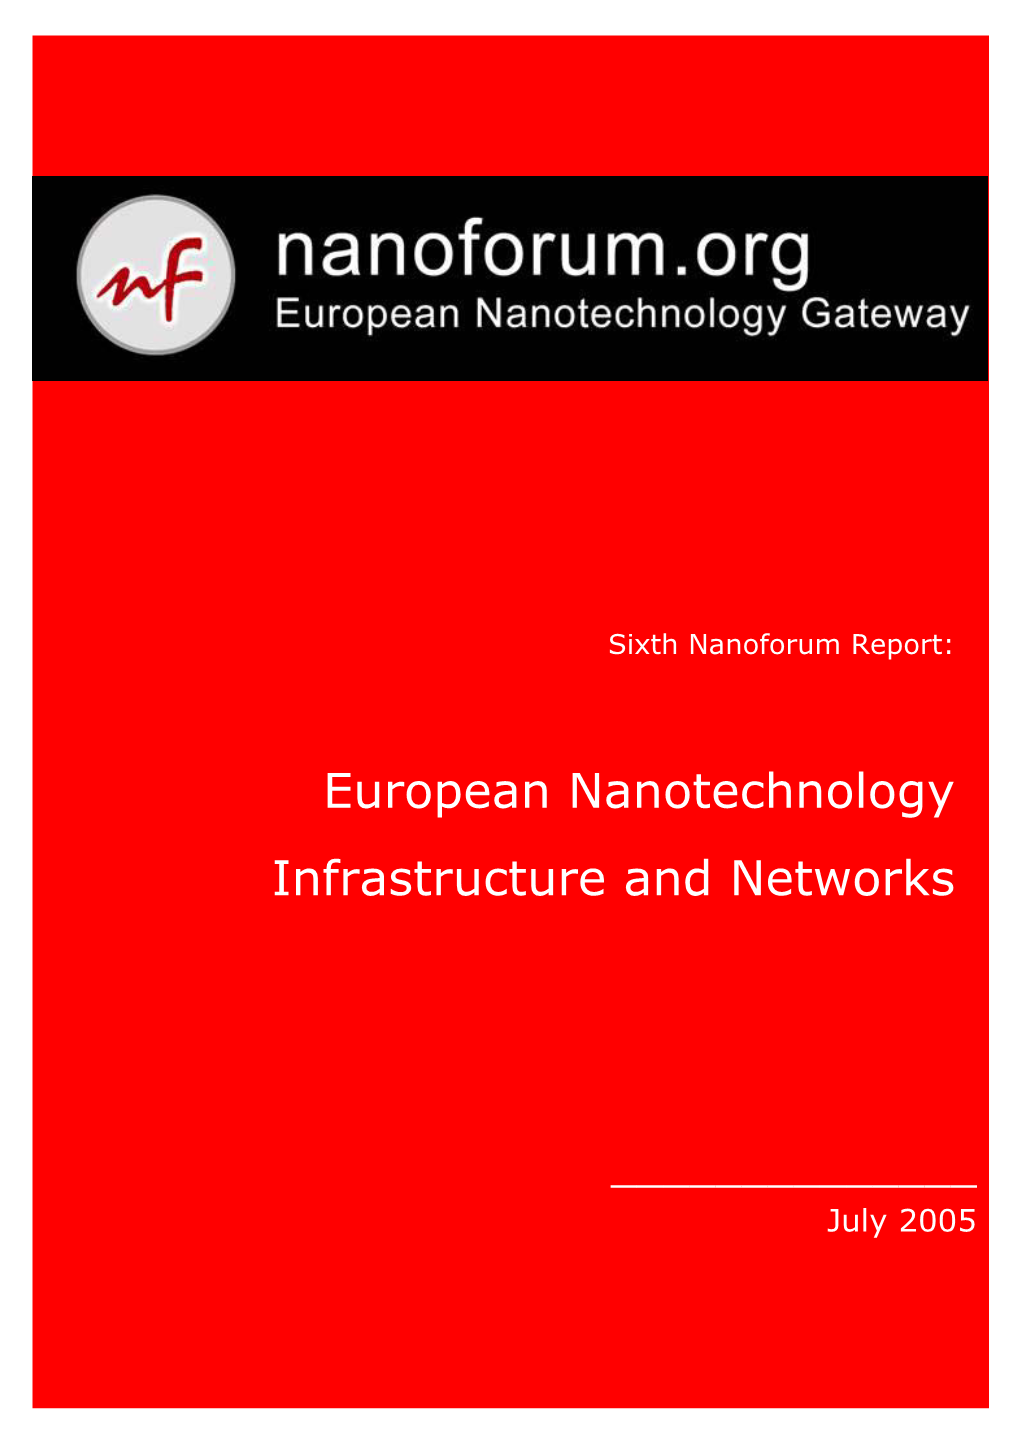 European Nanotechnology Infrastructure and Networks